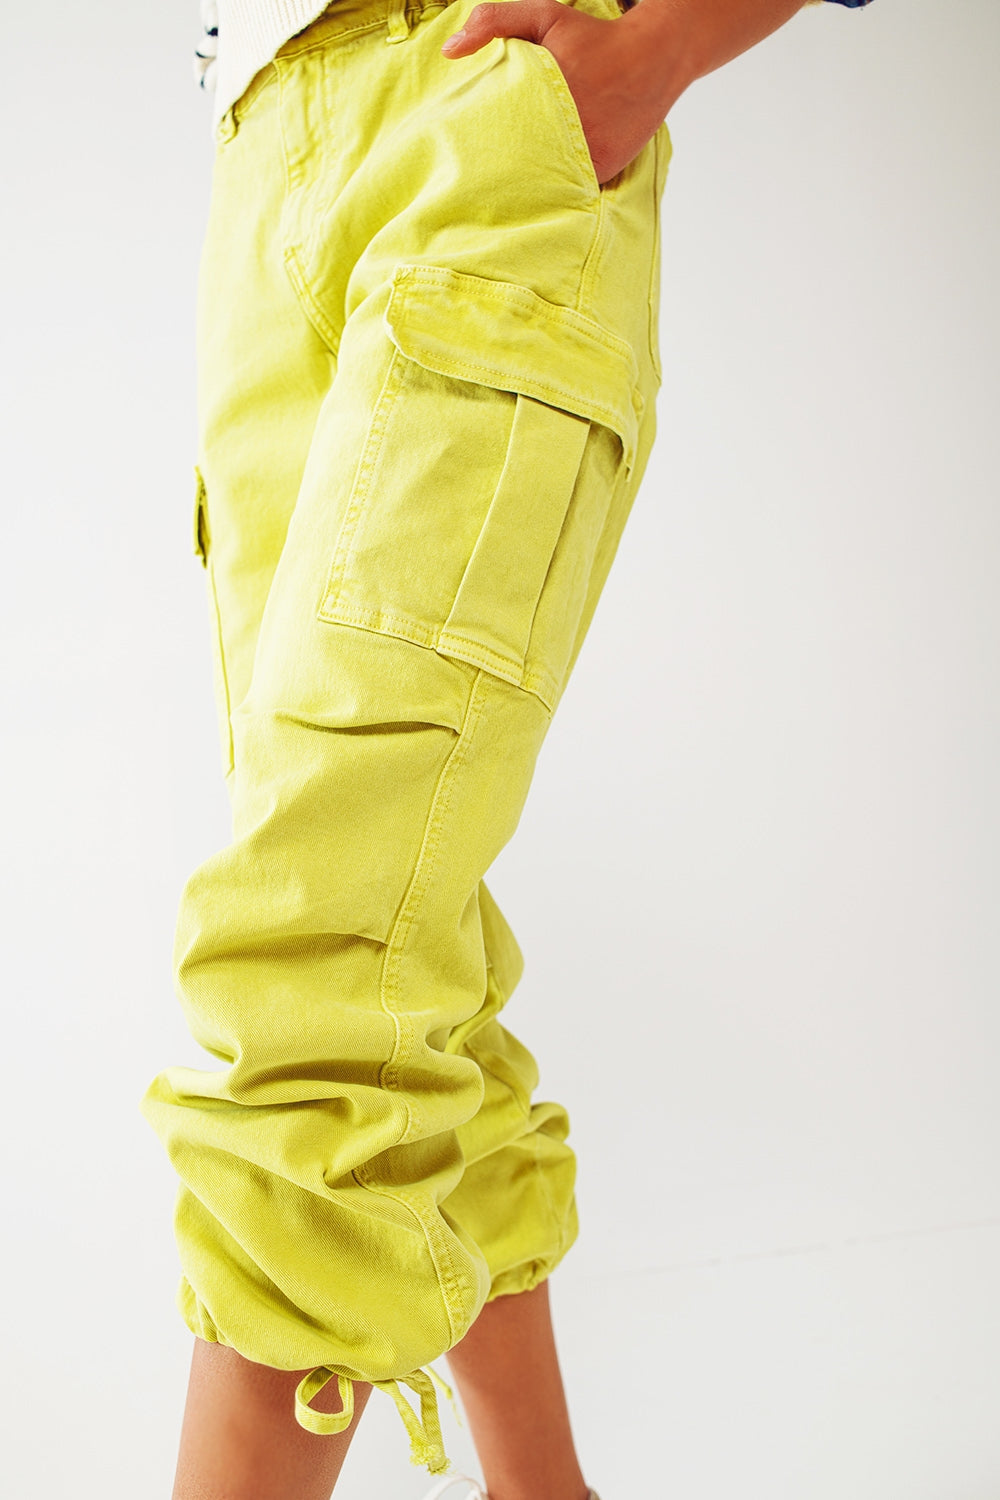 Cargo Pants with Tassel ends in lime - Szua Store